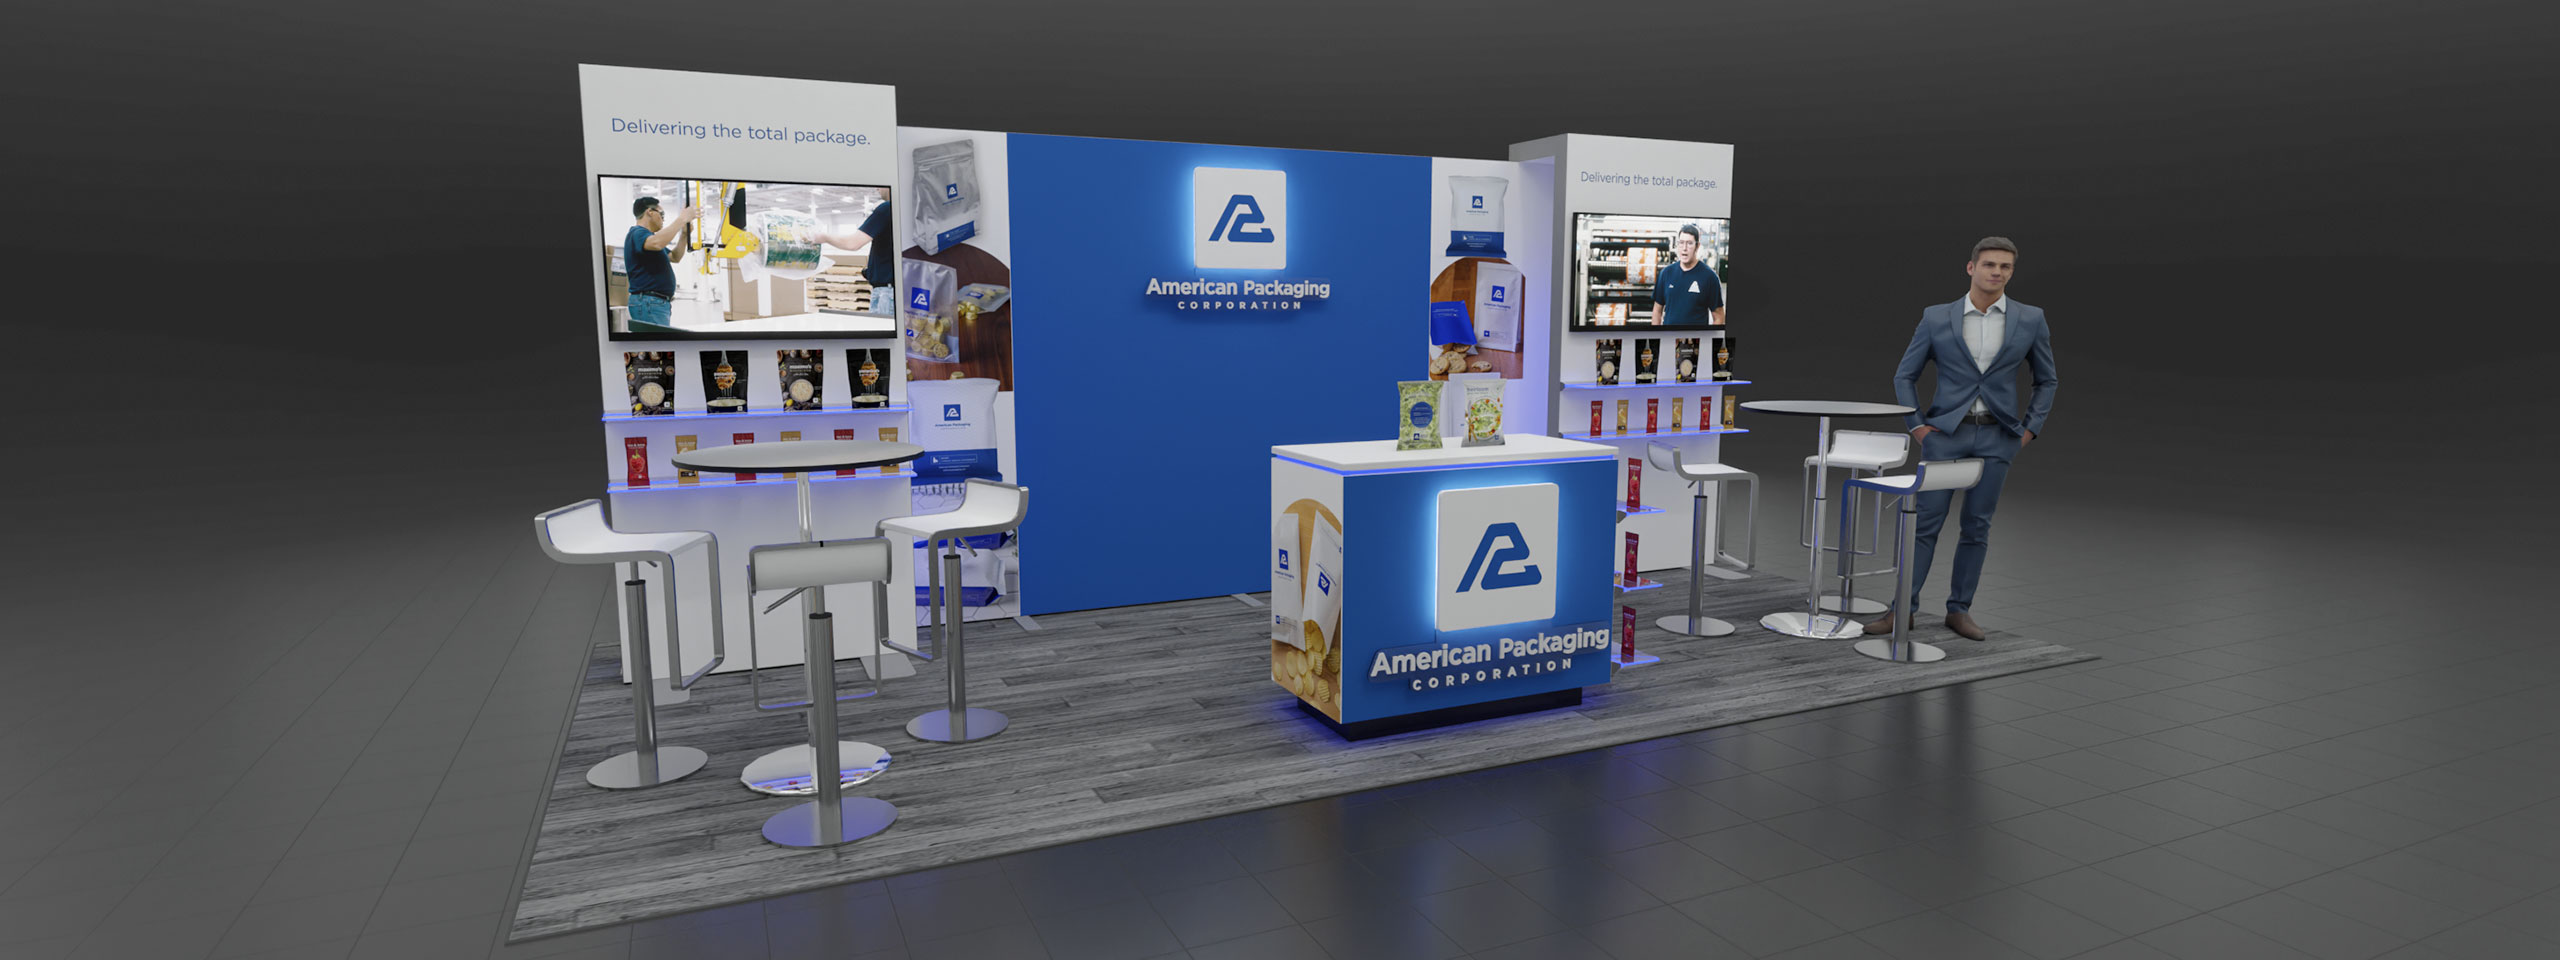 3D tradeshow booth render for American Packaging Corporation